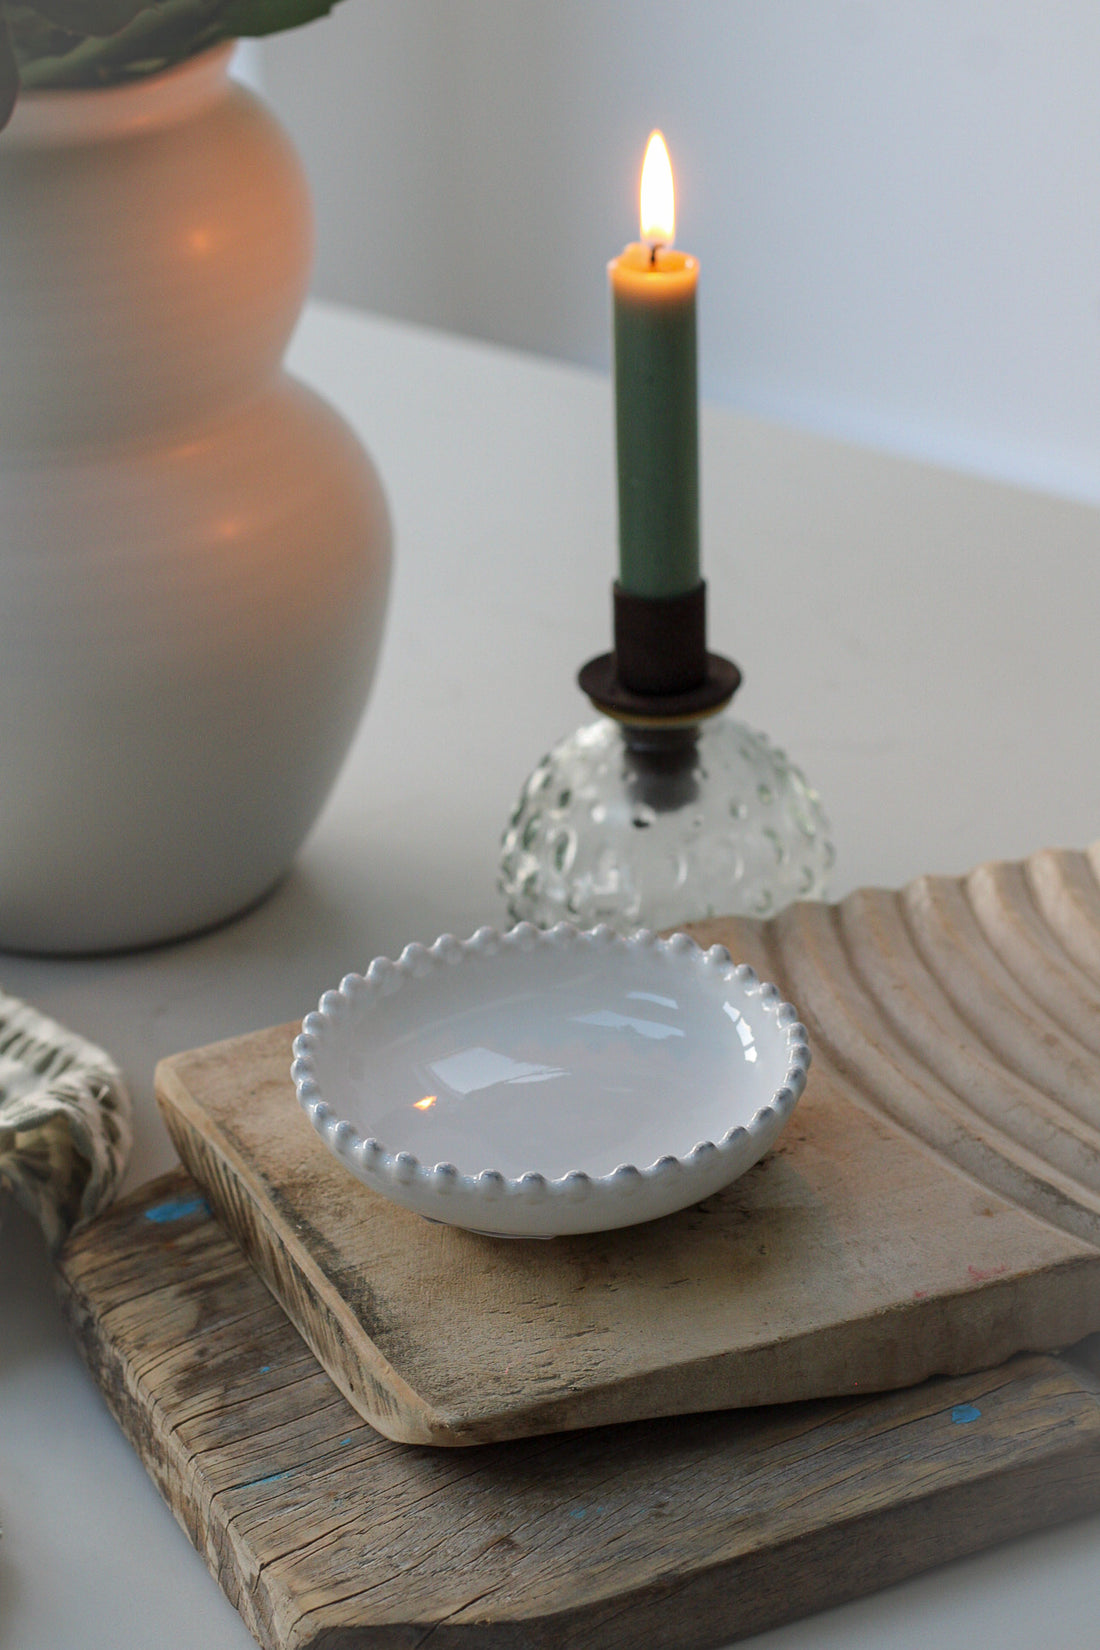 White ceramic mini dish with pearl edge detail on wooden wash boards  Edit alt text